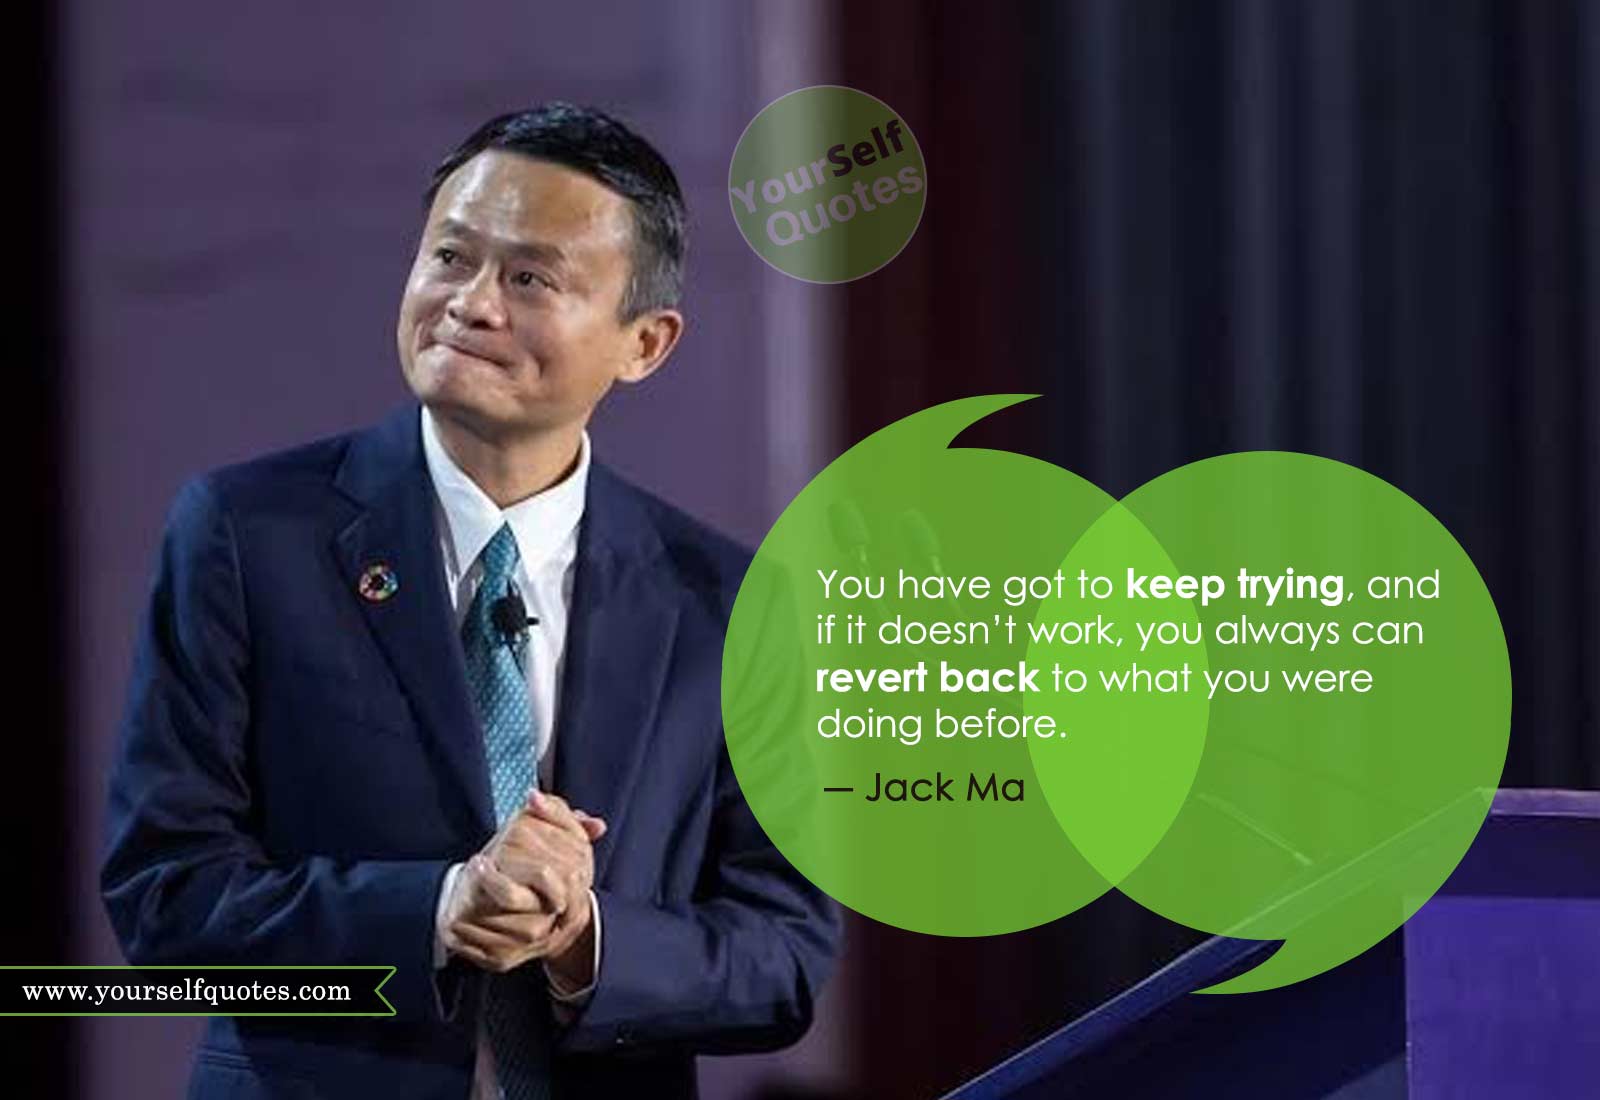 Jack Ma Quotes on Work